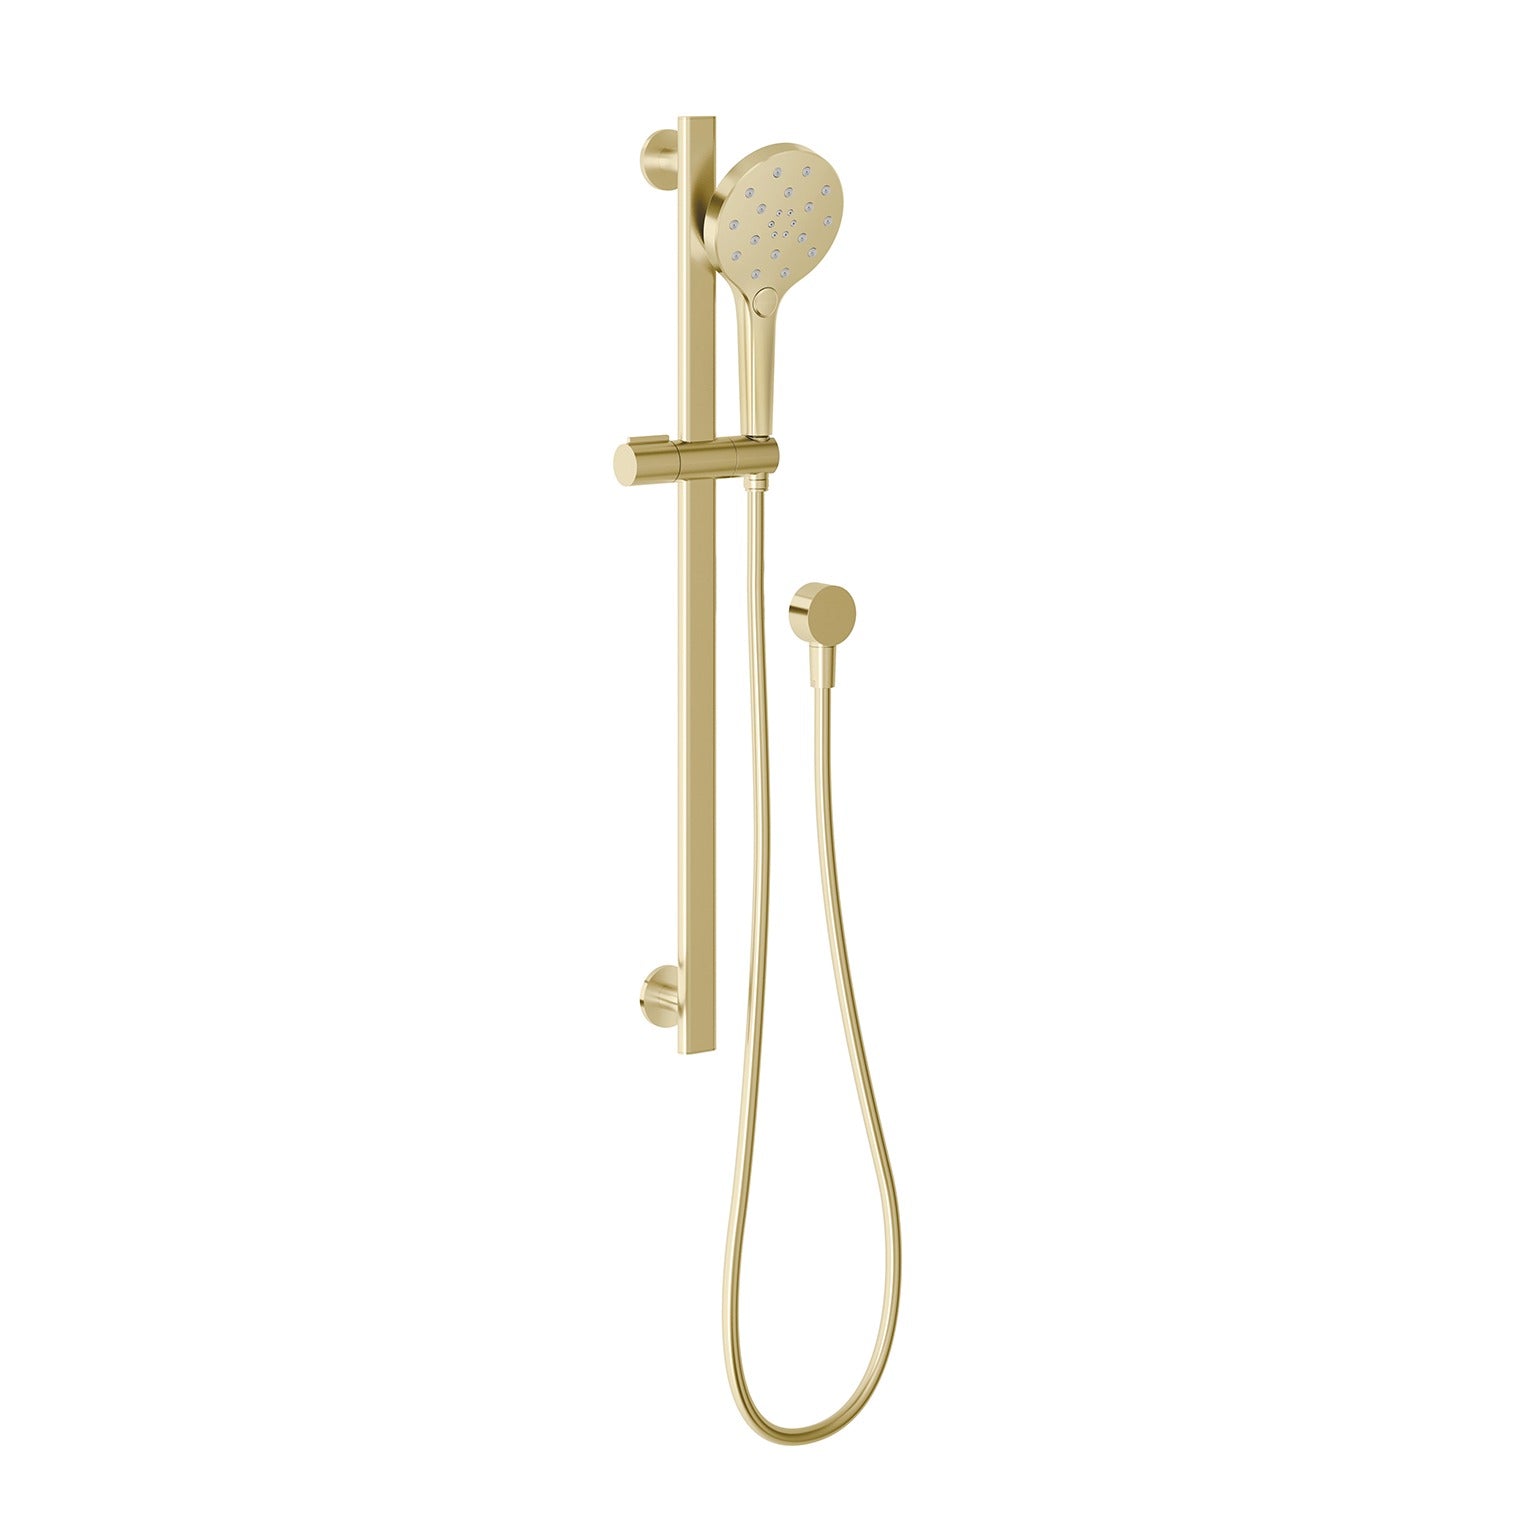 PHOENIX OXLEY RAIL SHOWER BRUSHED GOLD